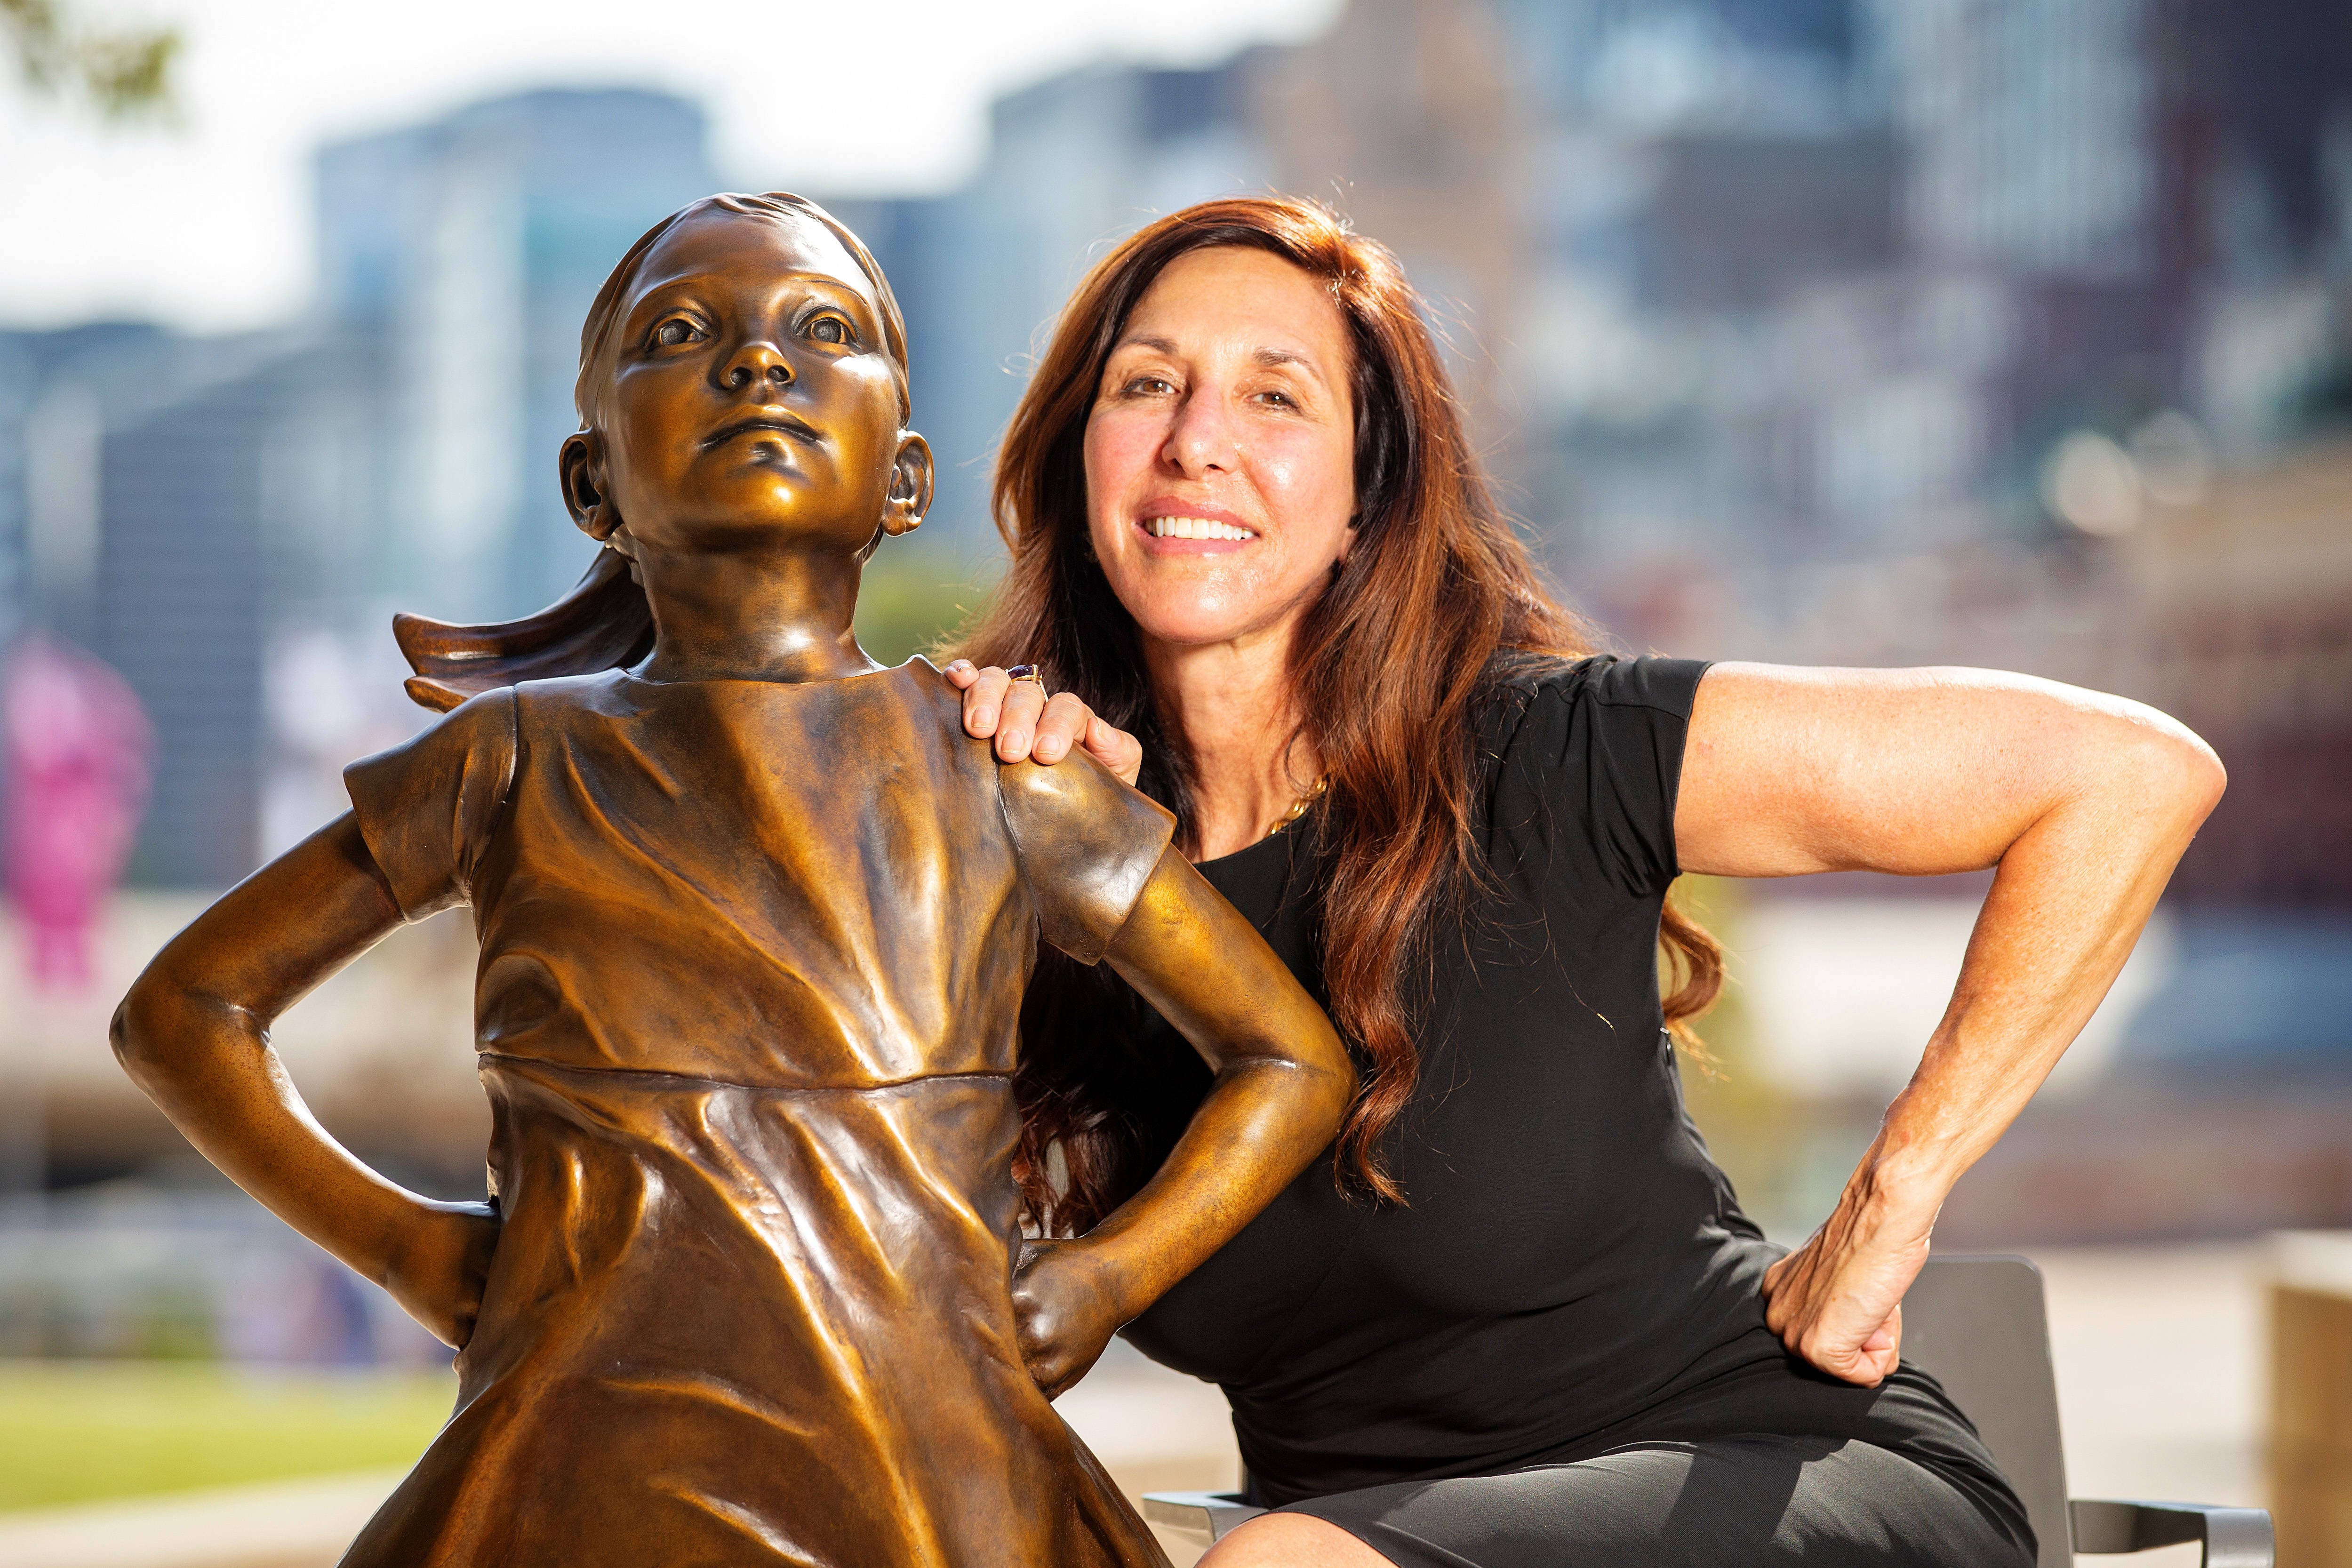 The Artist Behind ‘Fearless Girl’ Is Selling NFTs to Fund Her Legal Case Against the Company That Put the Statue on Wall Street